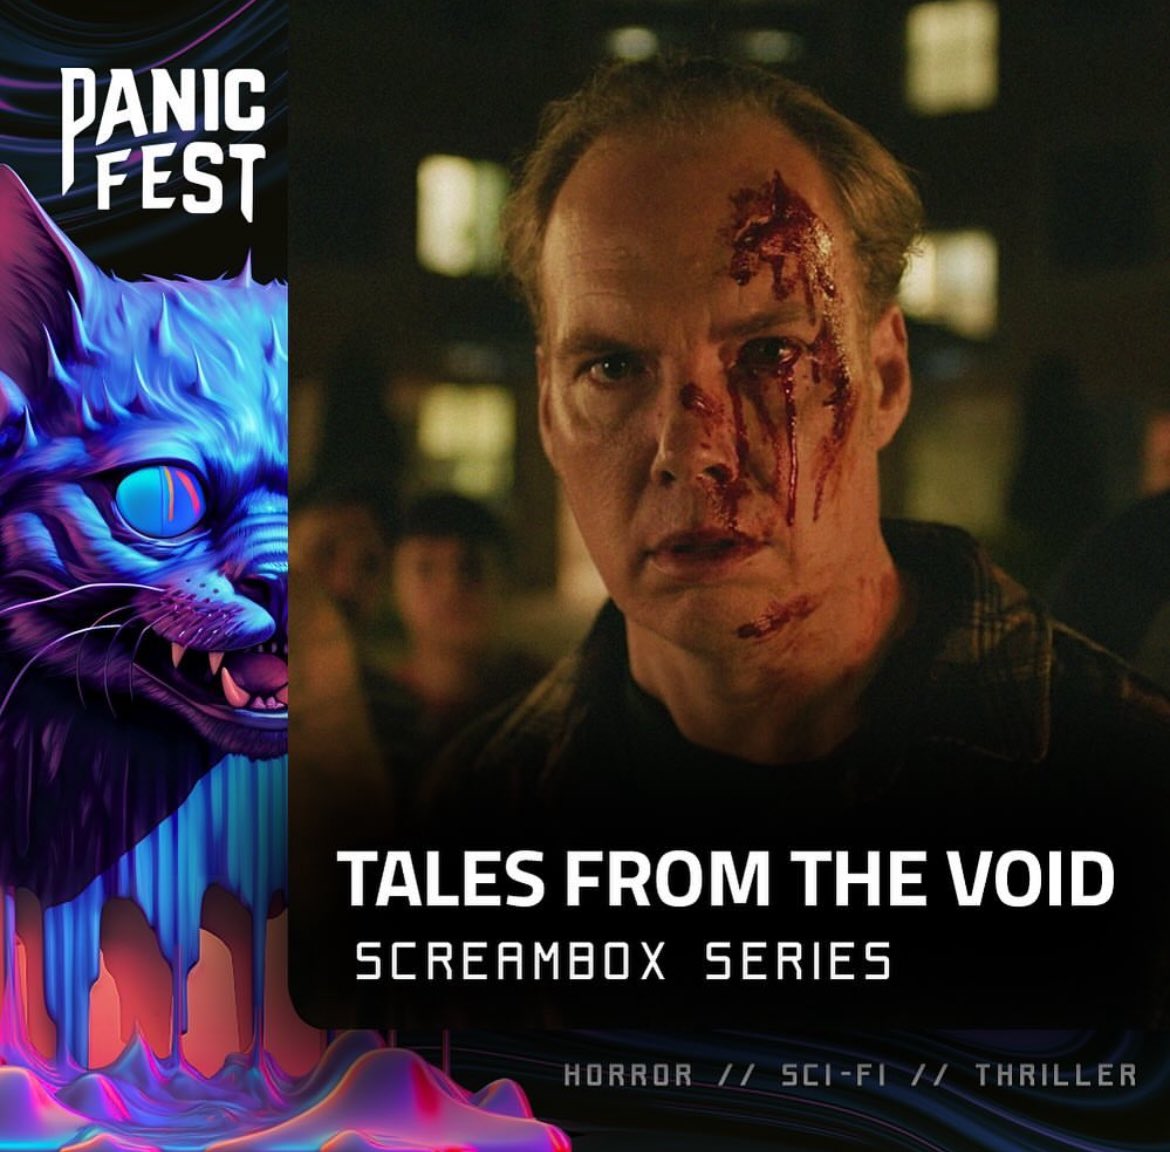 We’re coming to @panicfilmfest for a special screening of two episodes: Into The Unknown - Directed by @thejoelynch Fixed Frequency - Directed by @FLfilm #horror #scifi #thriller #anthology #nosleep #tv